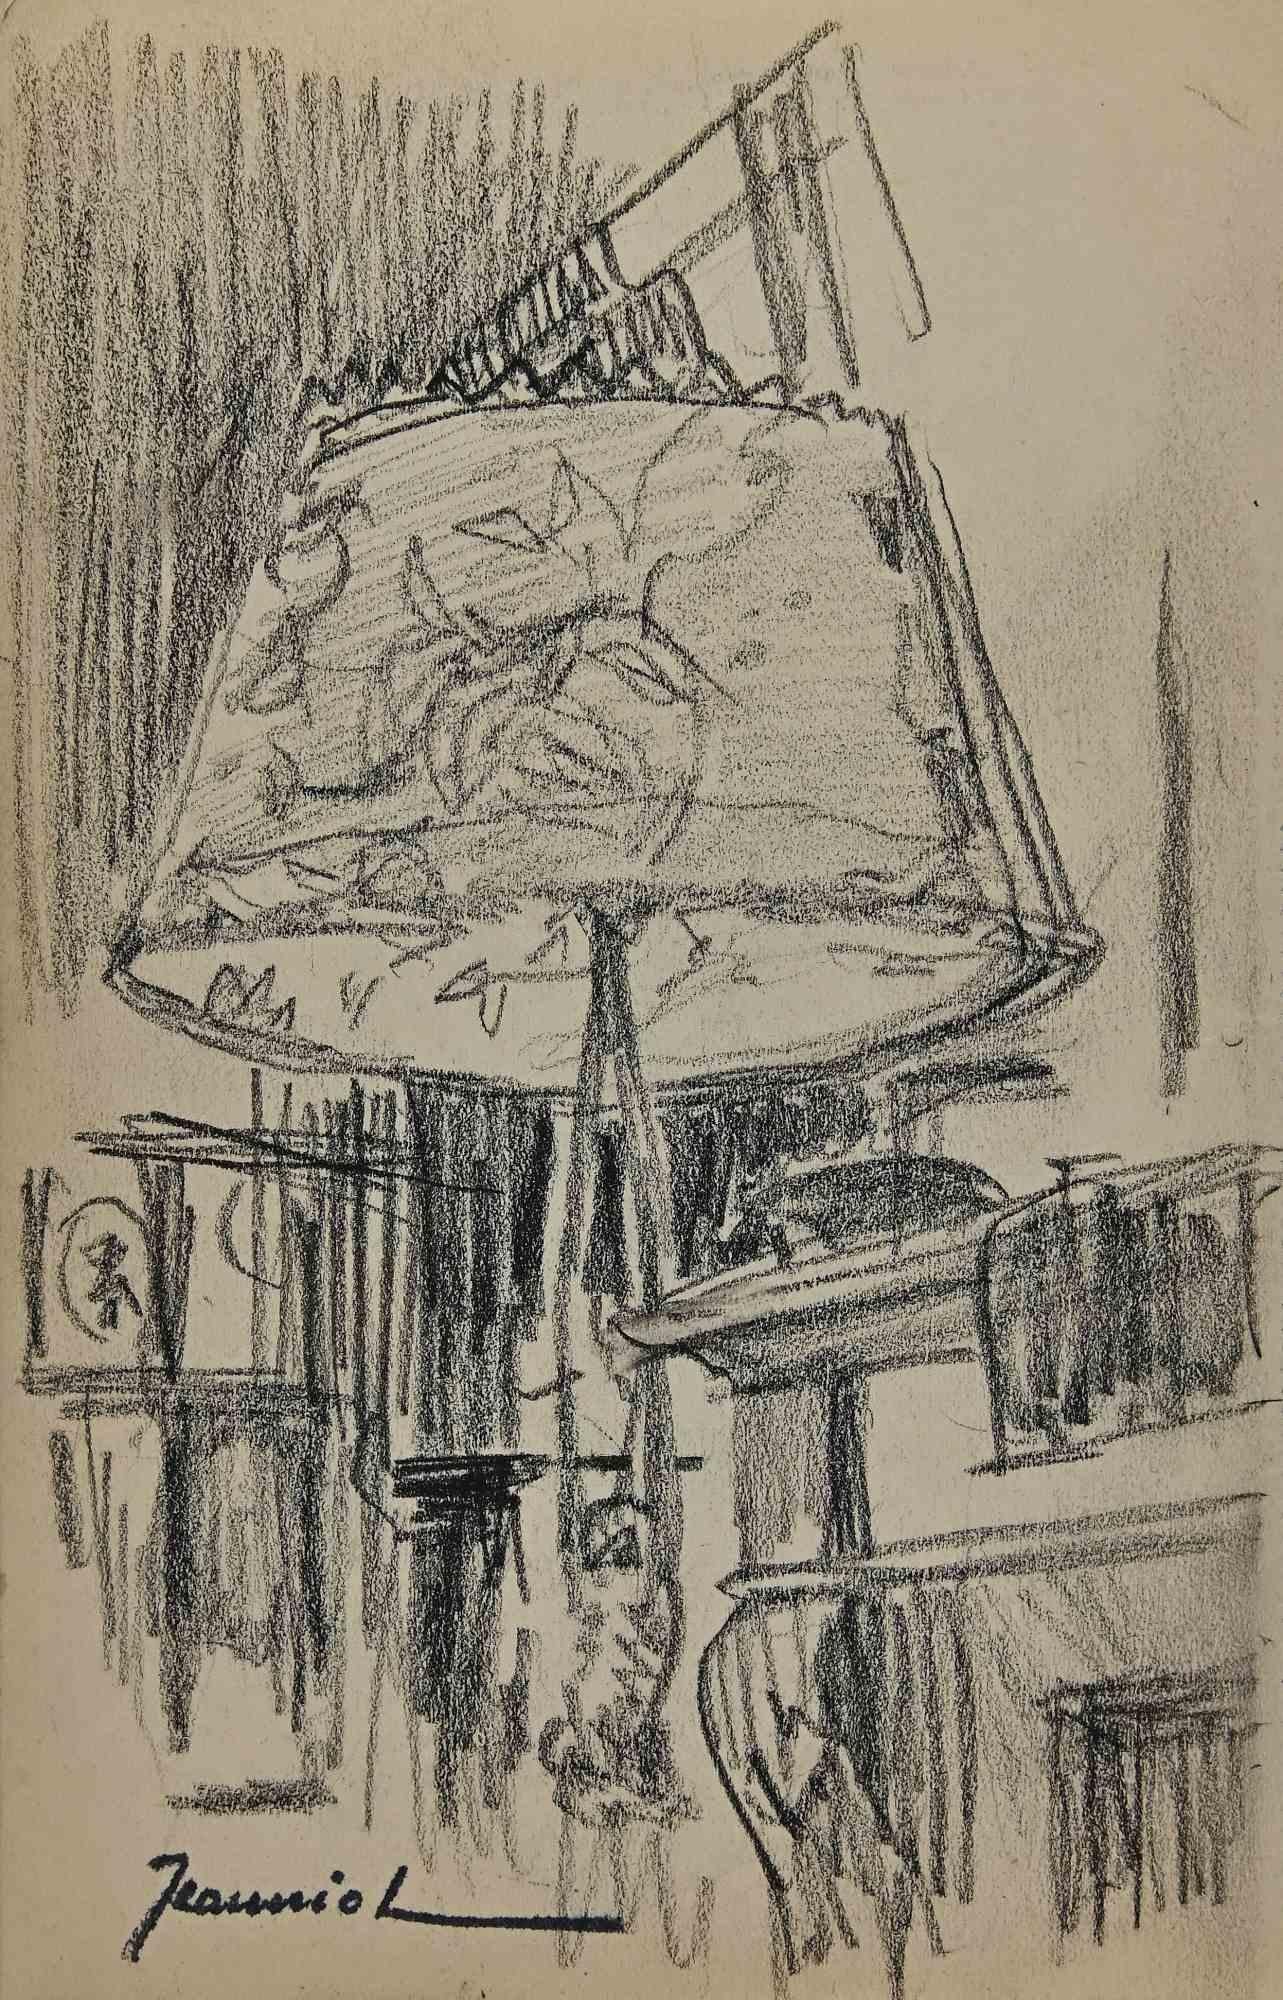 The Lamp is an original Drawing on paper realized by the painter Pierre Georges Jeanniot (1848-1934).

Drawing in Pencil.

Hand-signed on the lower.

Good conditions except for aged margins.

The artwork is represented through deft and quick strokes